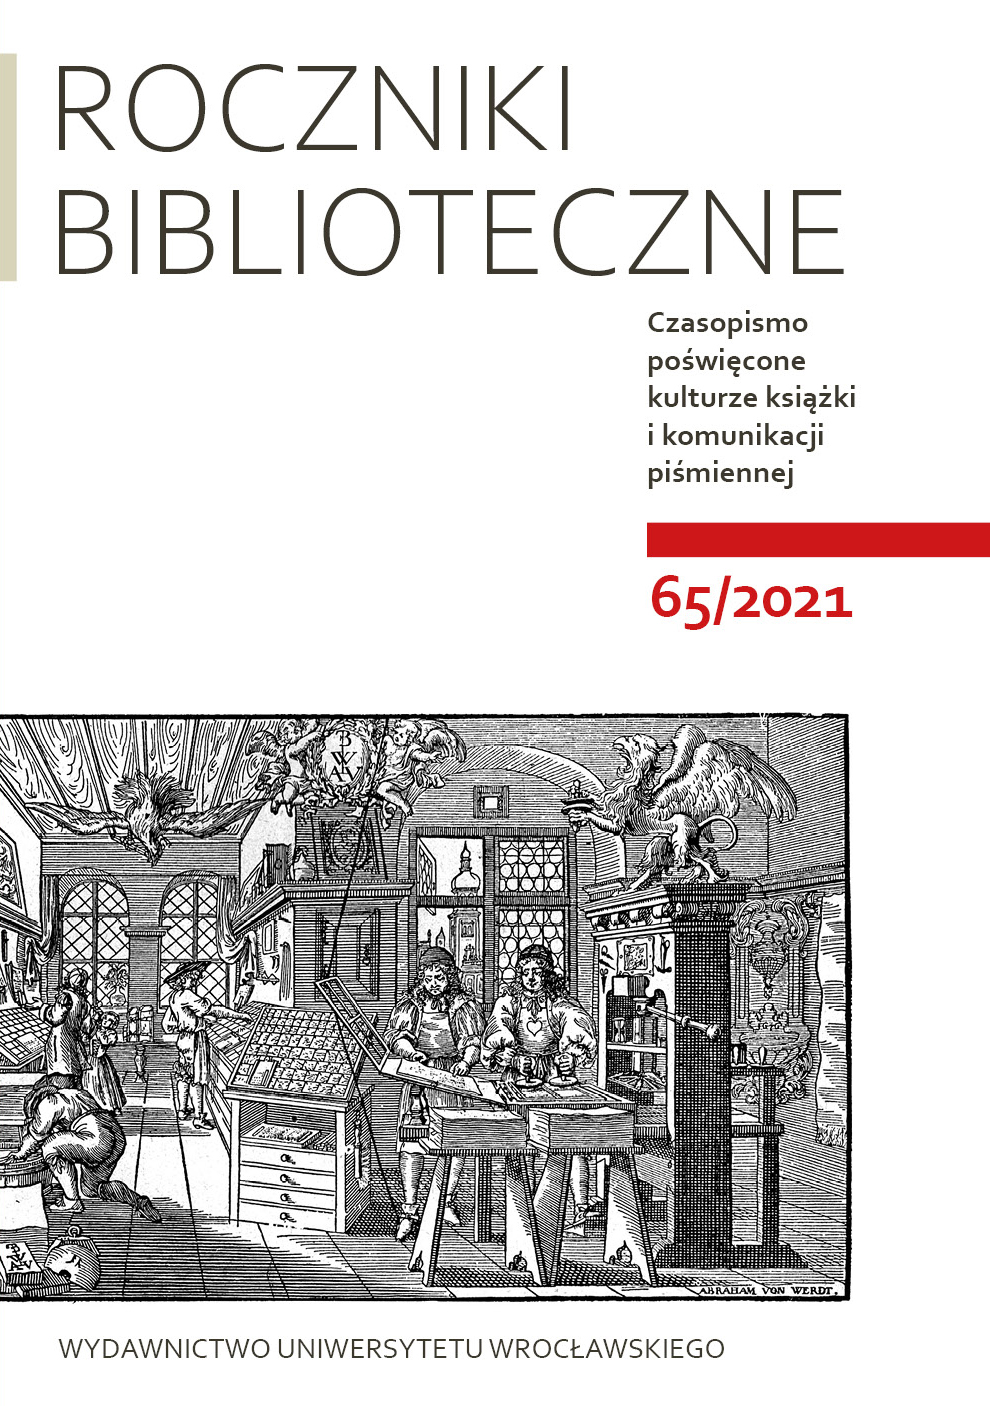 Exhibits and museum exhibit catalogues as sources of information in a museum (regarding the exhibition “Migrations. Late Gothic art in Silesia” at the National Museum in Wrocław) Cover Image